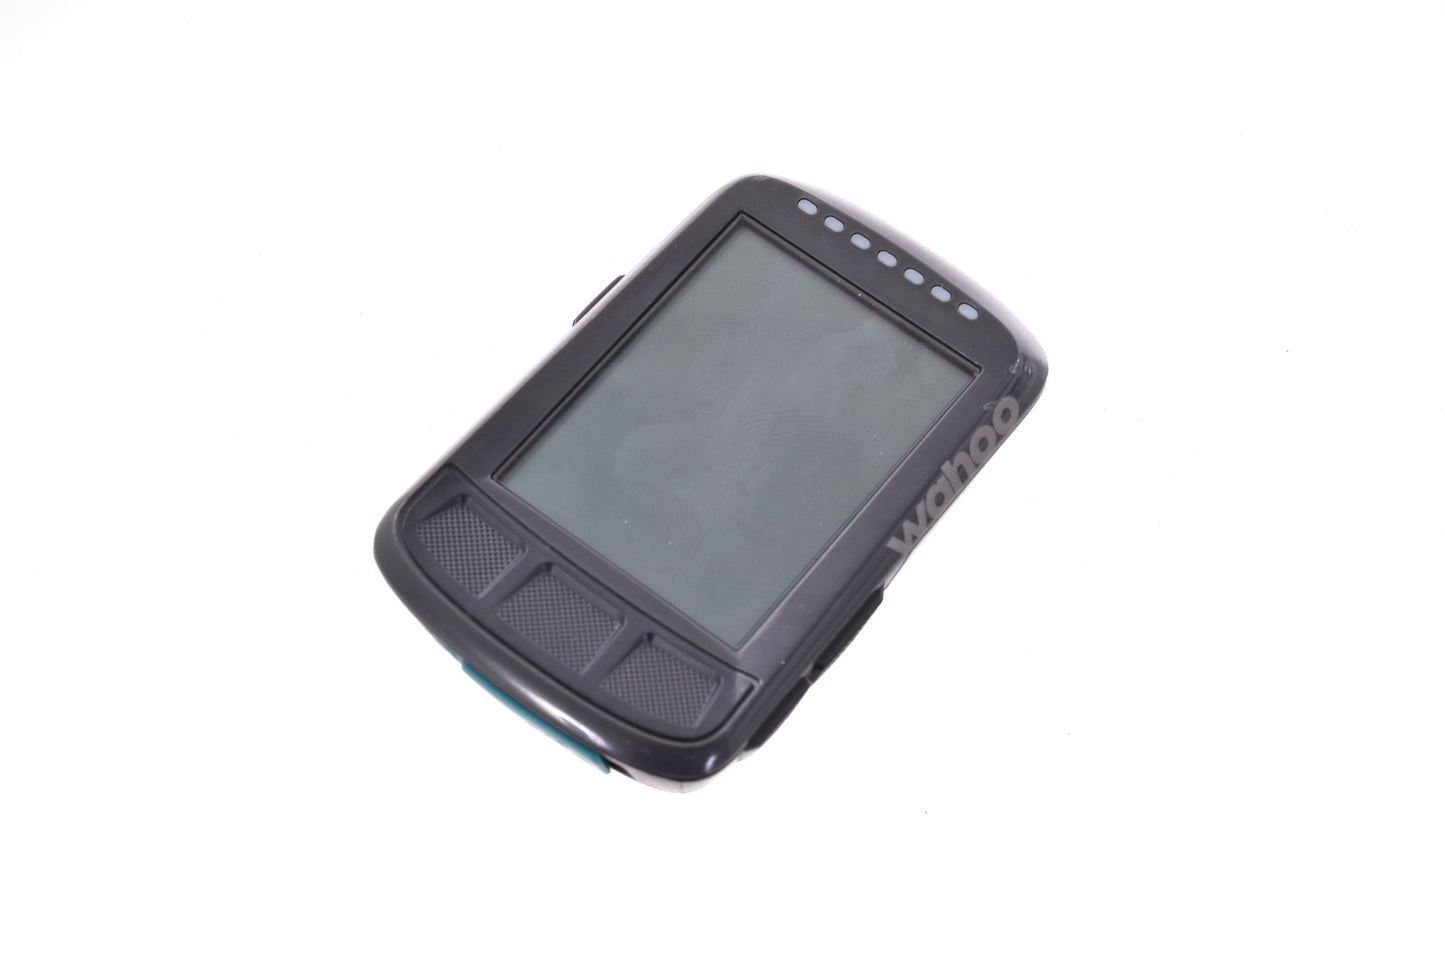 USED Wahoo ELEMNT BOLT GPS Cycling Computer Version 1